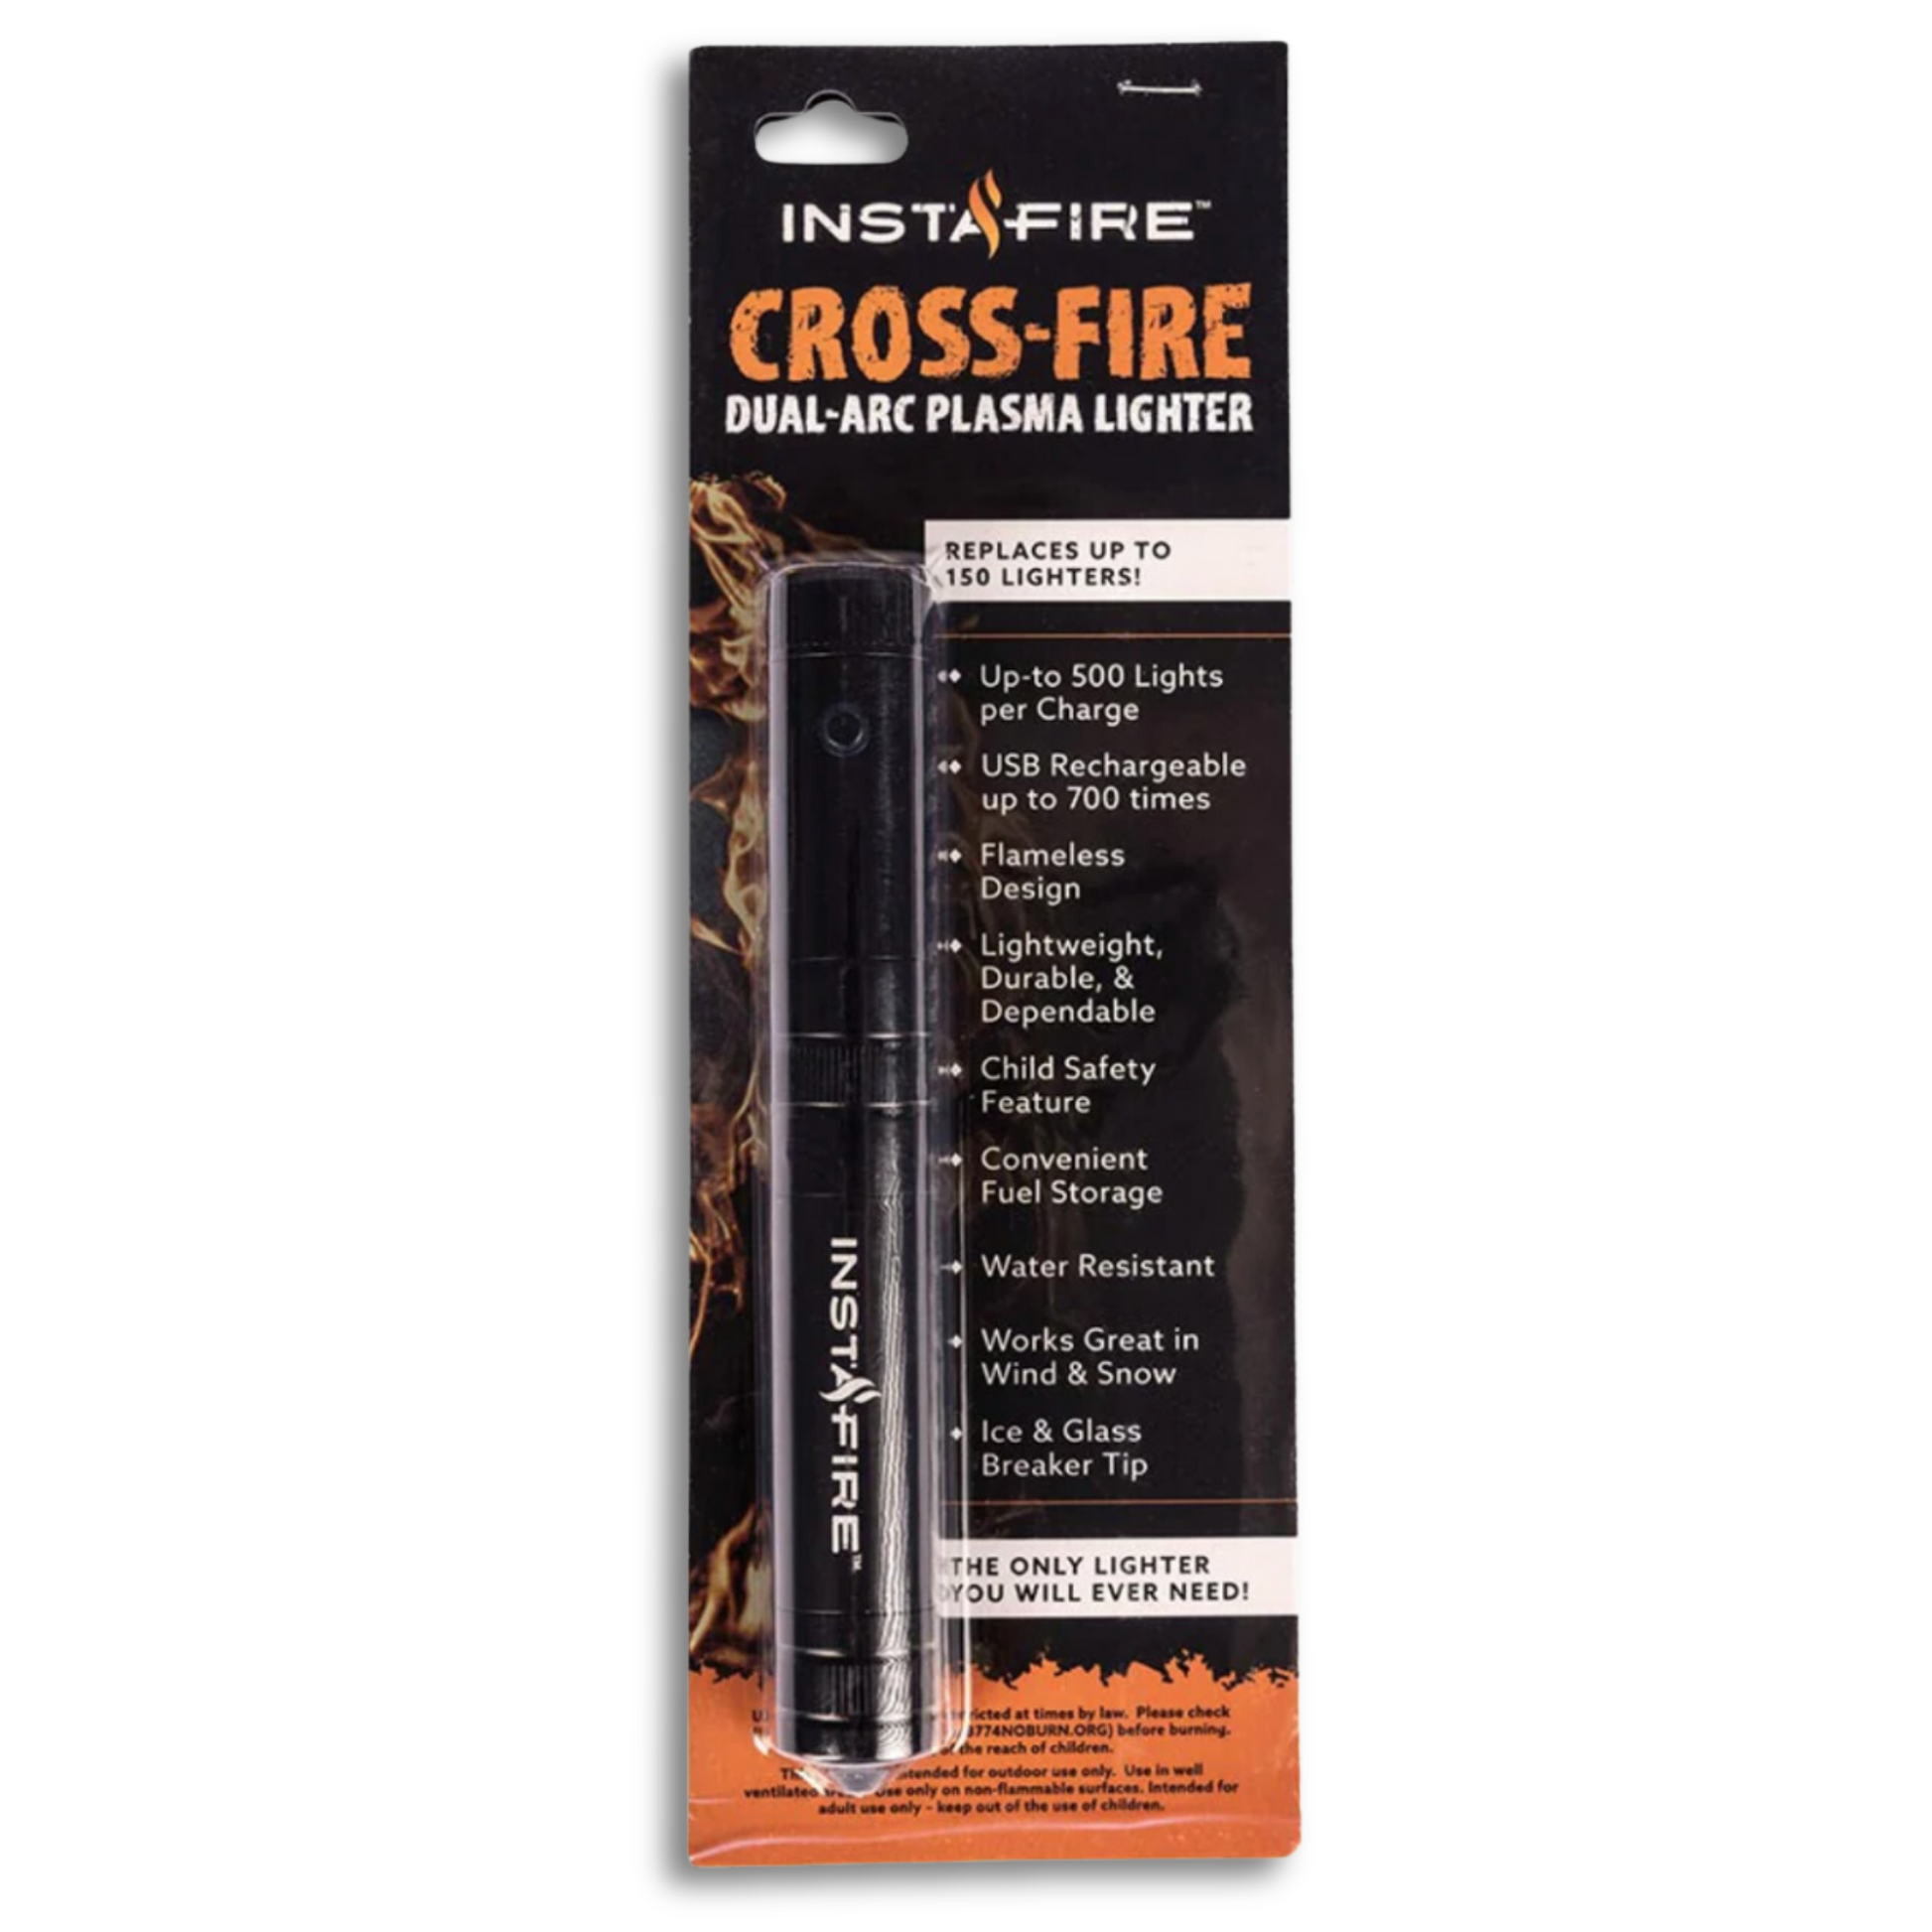 Cross-Fire Dual-Arc Plasma Lighter with in display package